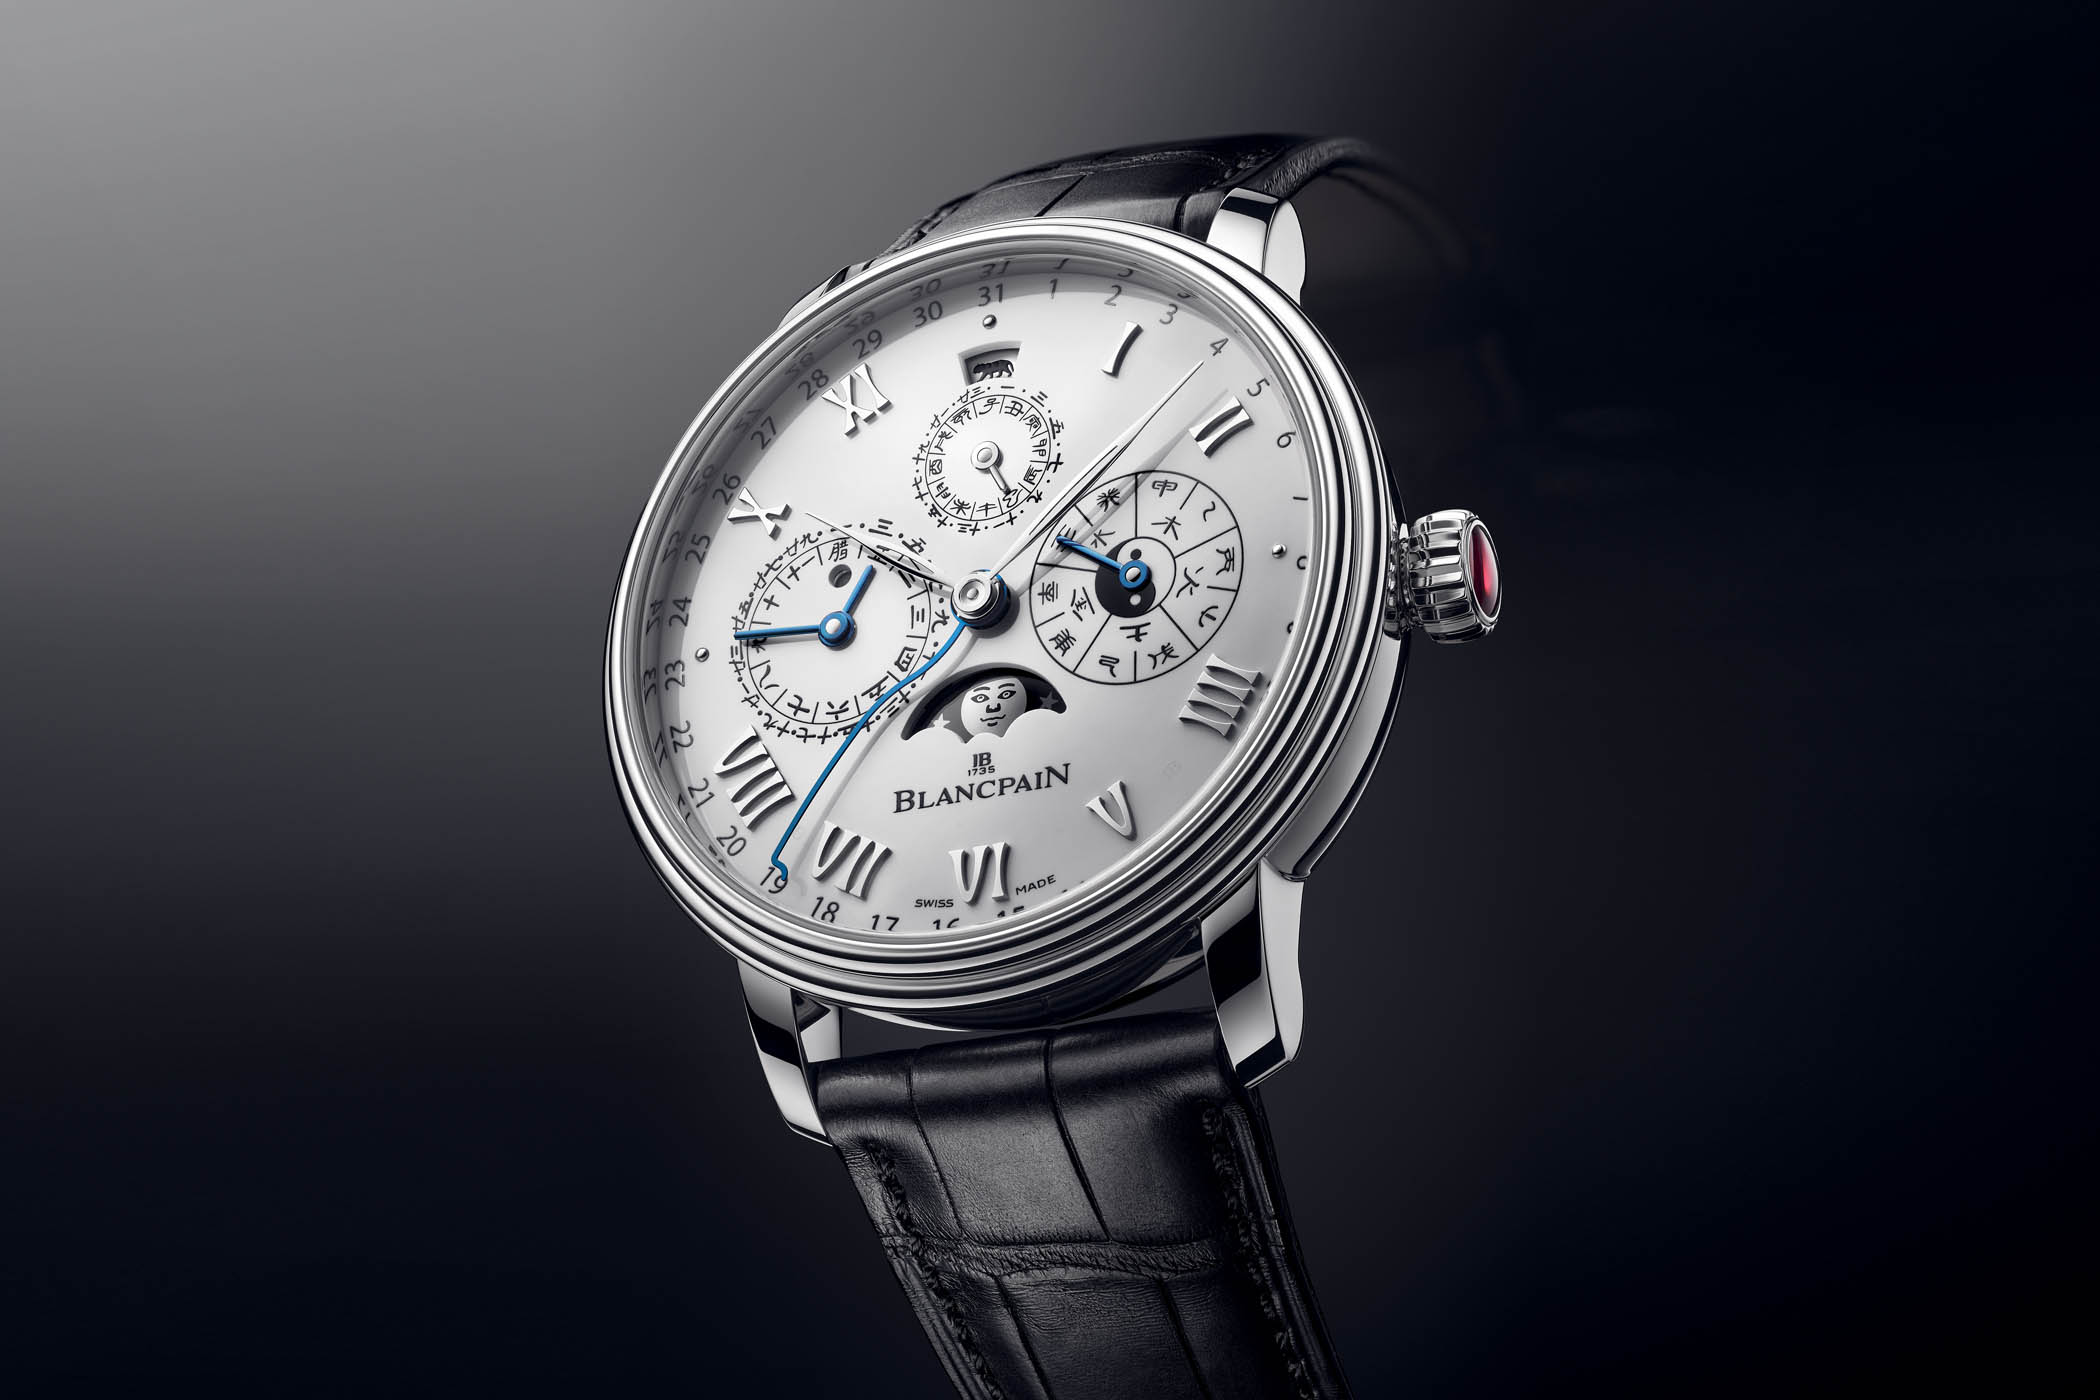 Blancpain Villeret Traditional Chinese Calendar year of the tiger